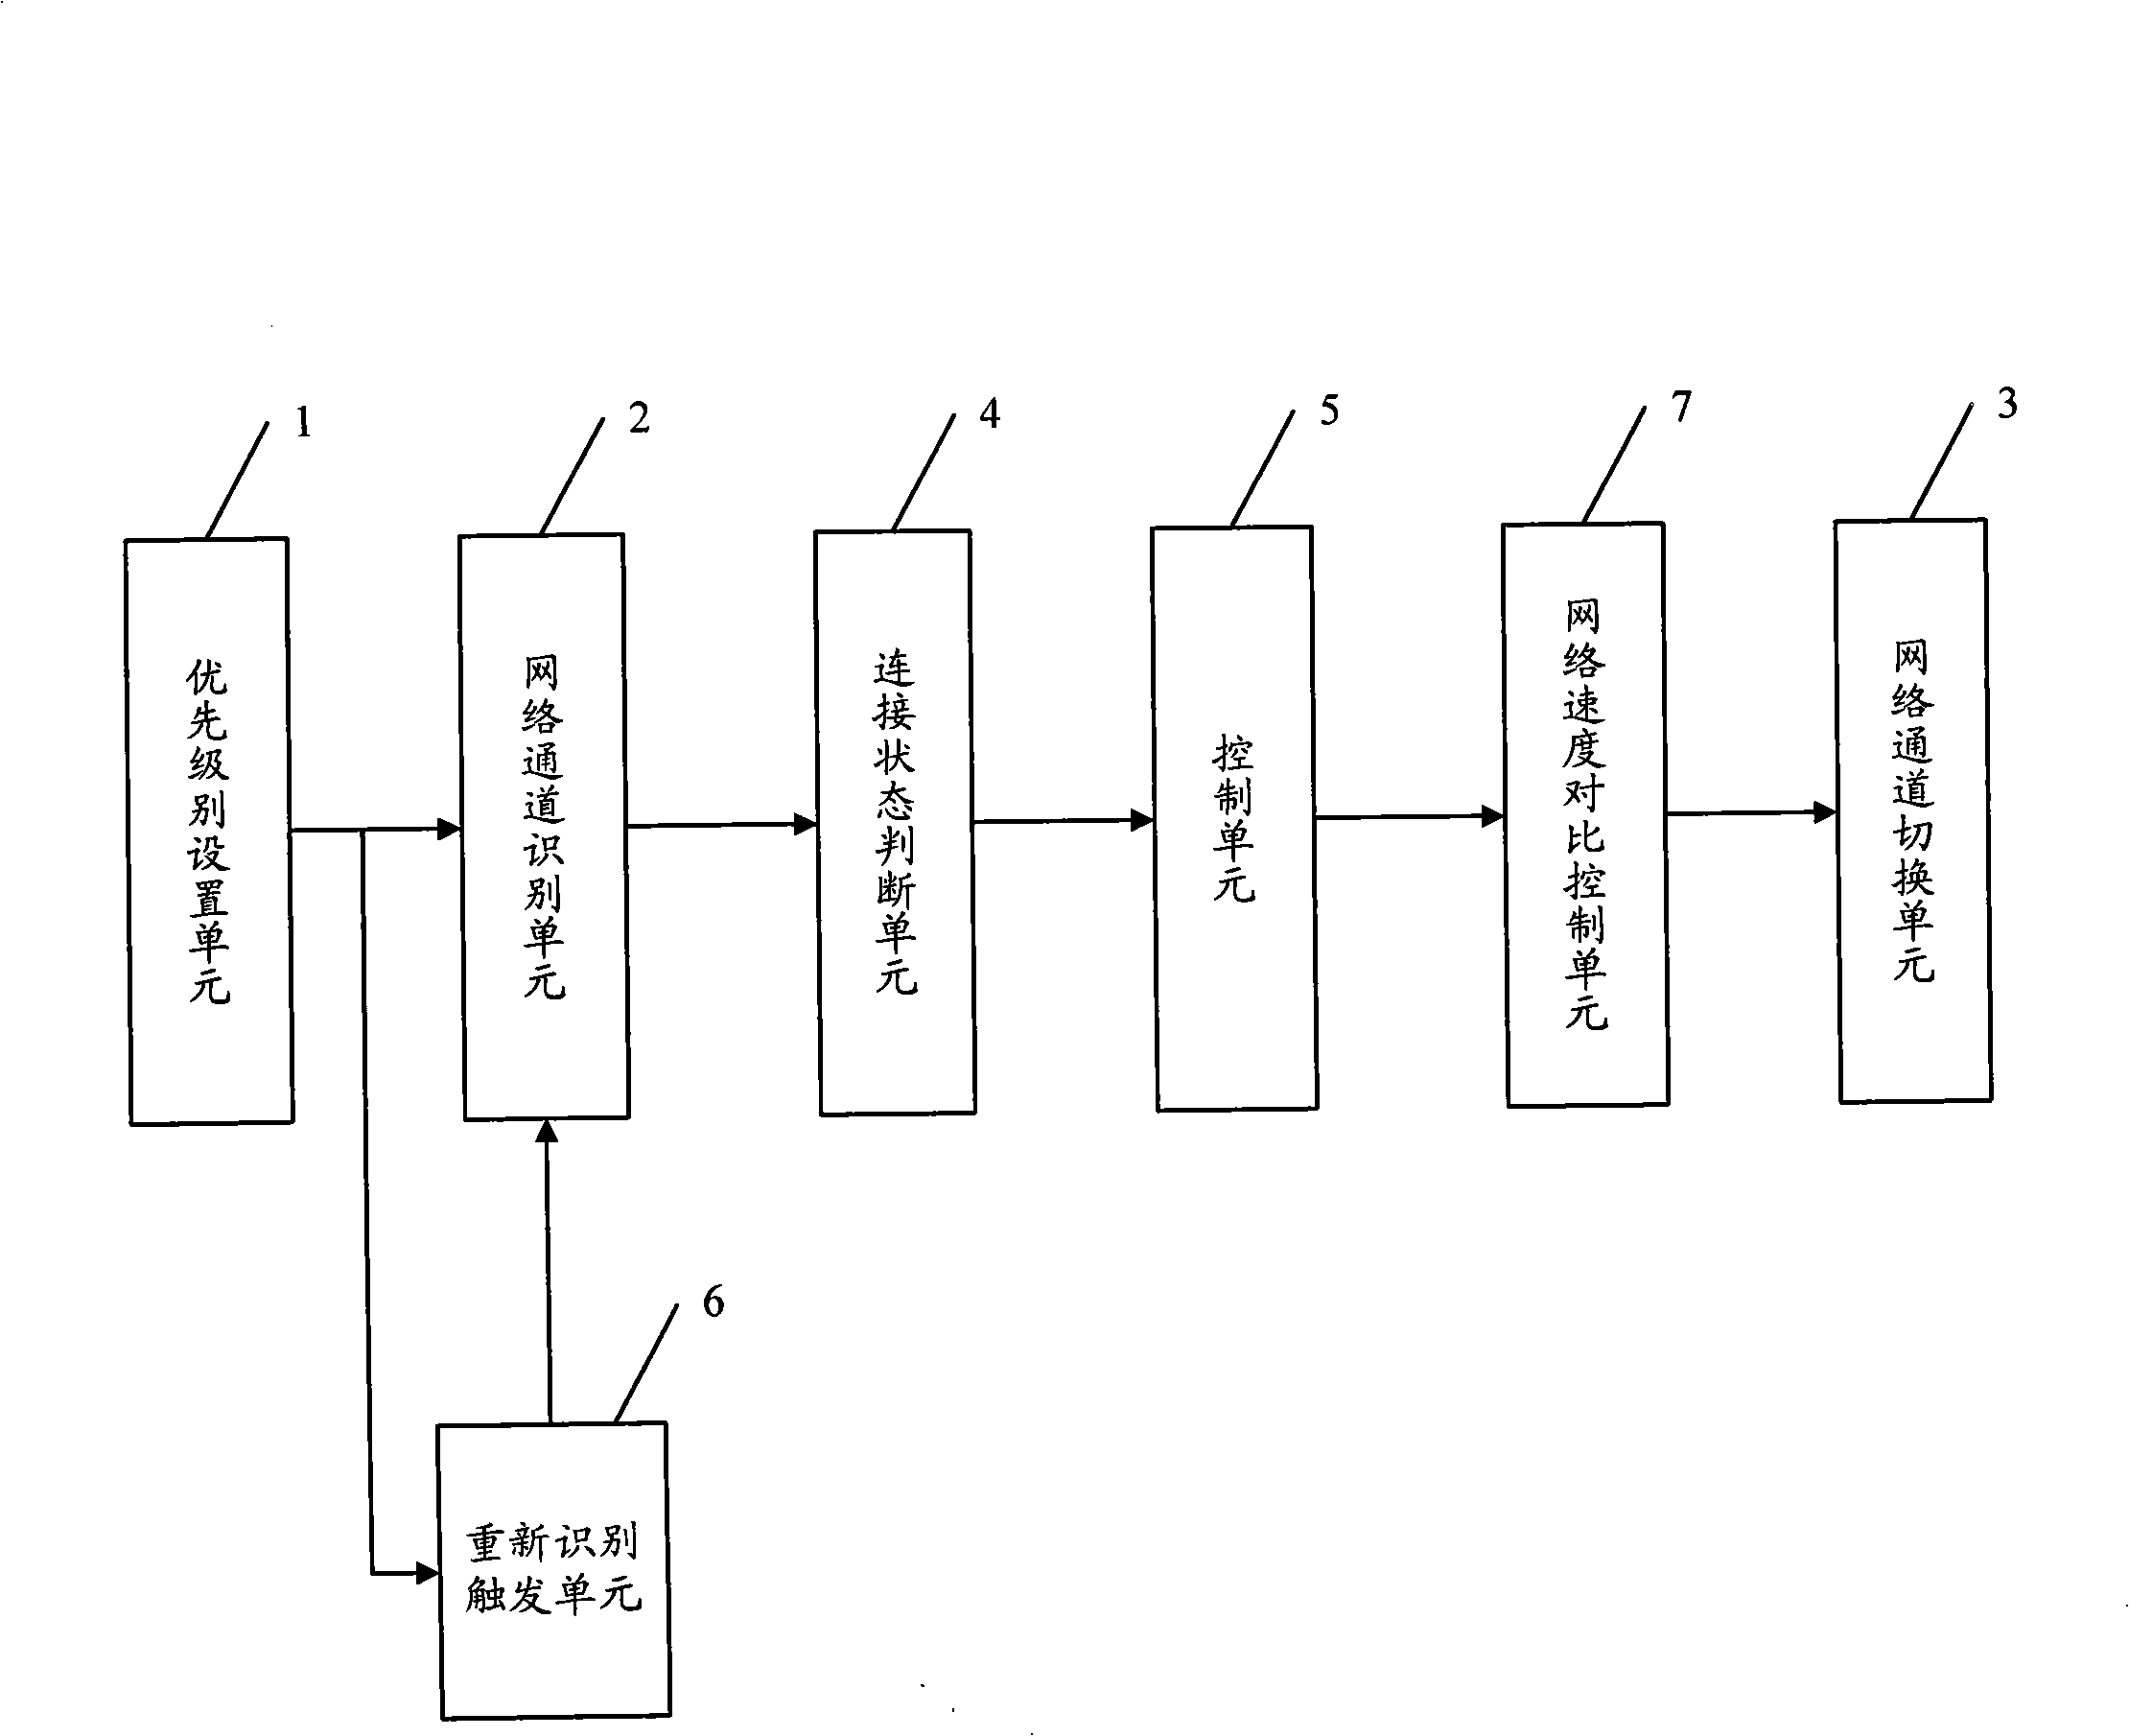 Terminal and method for automatically switching network channel